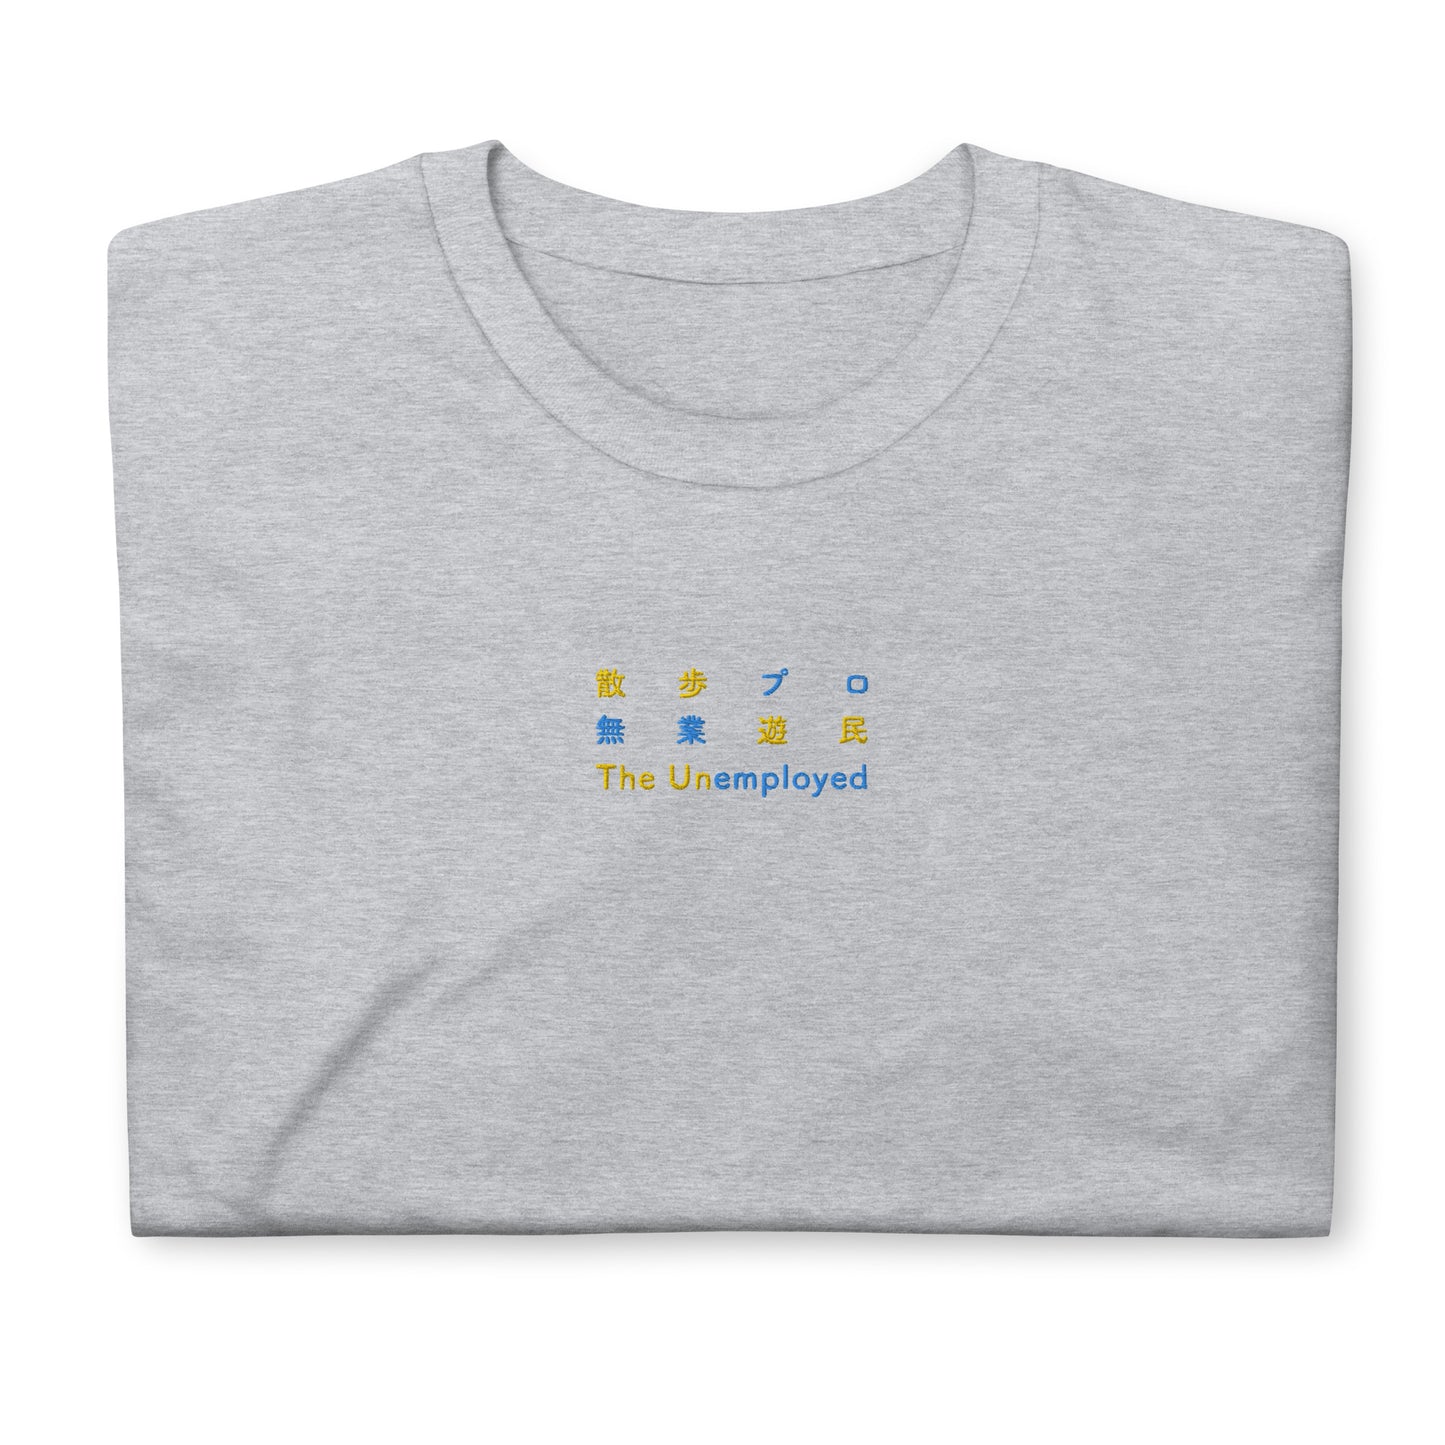 Light Gray High Quality Tee - Front Design with Yellow/Blue Embroidery "The Unemployed" in three languages